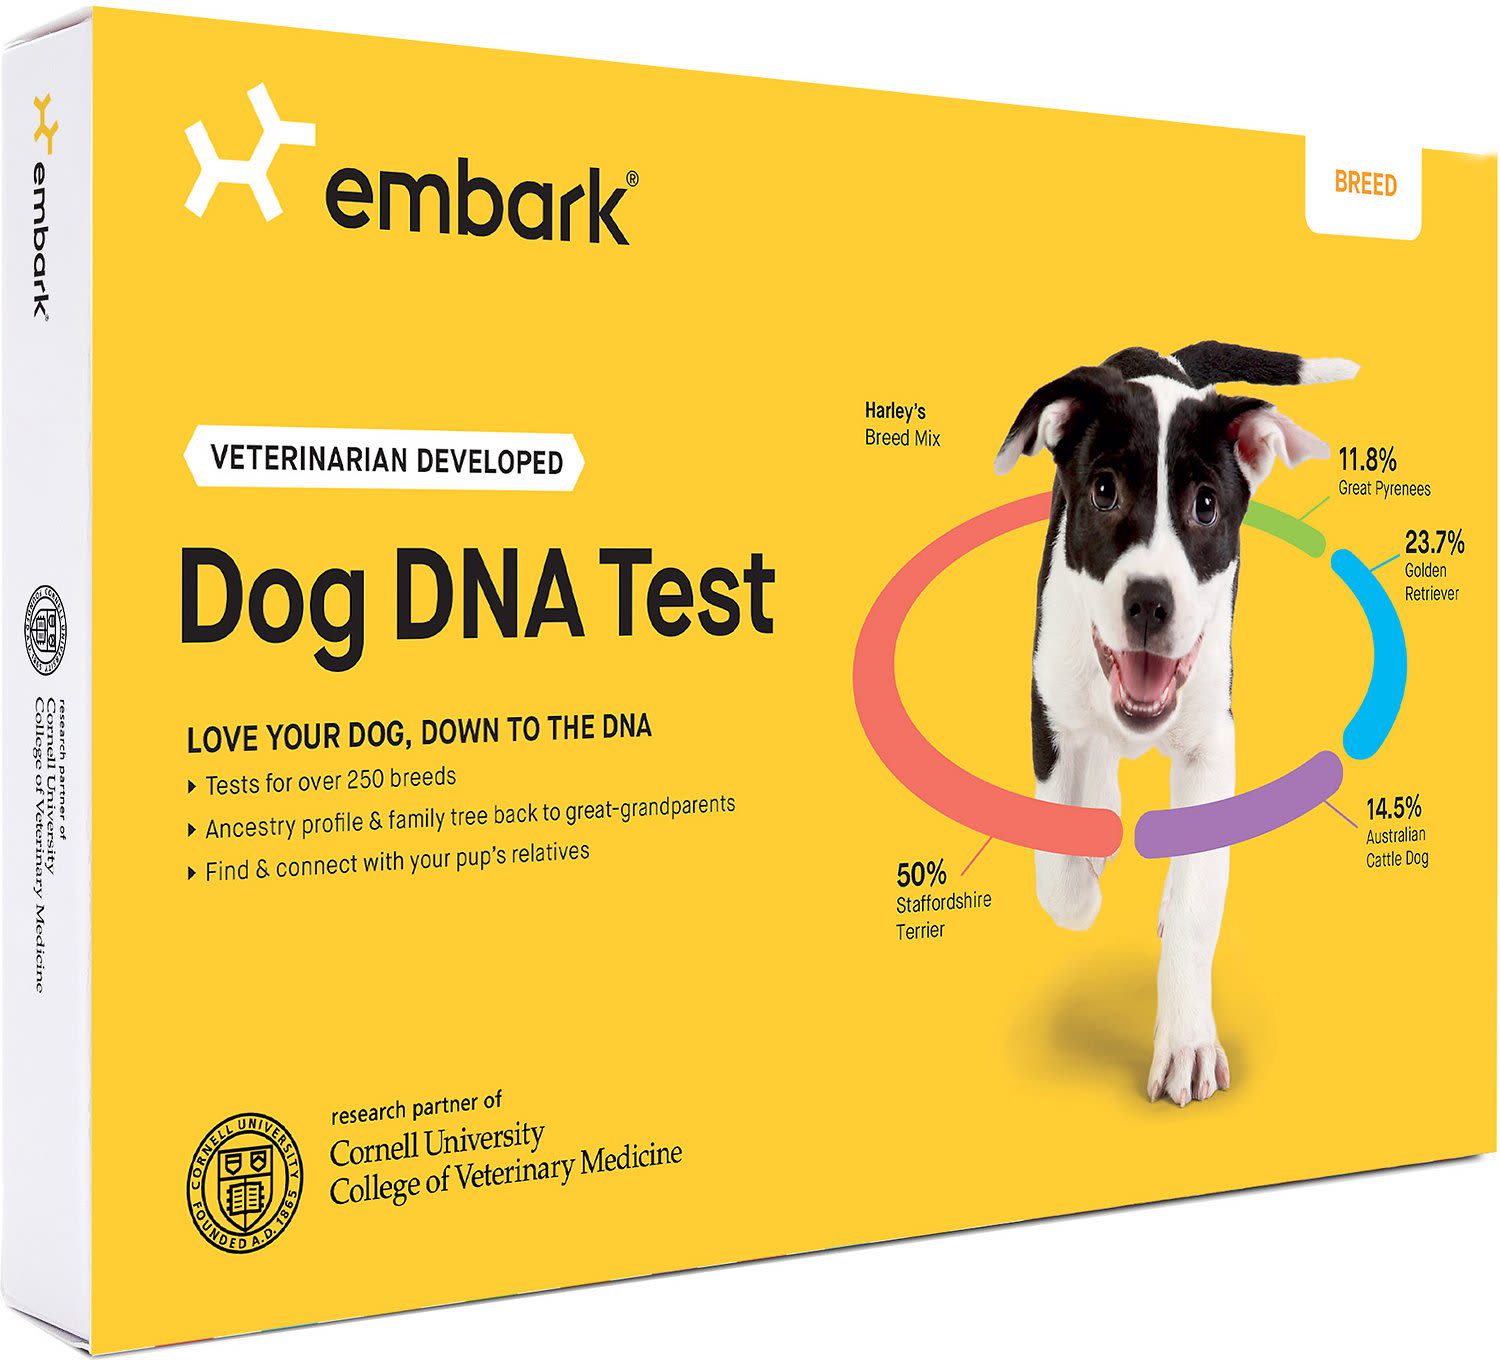 canine dna test